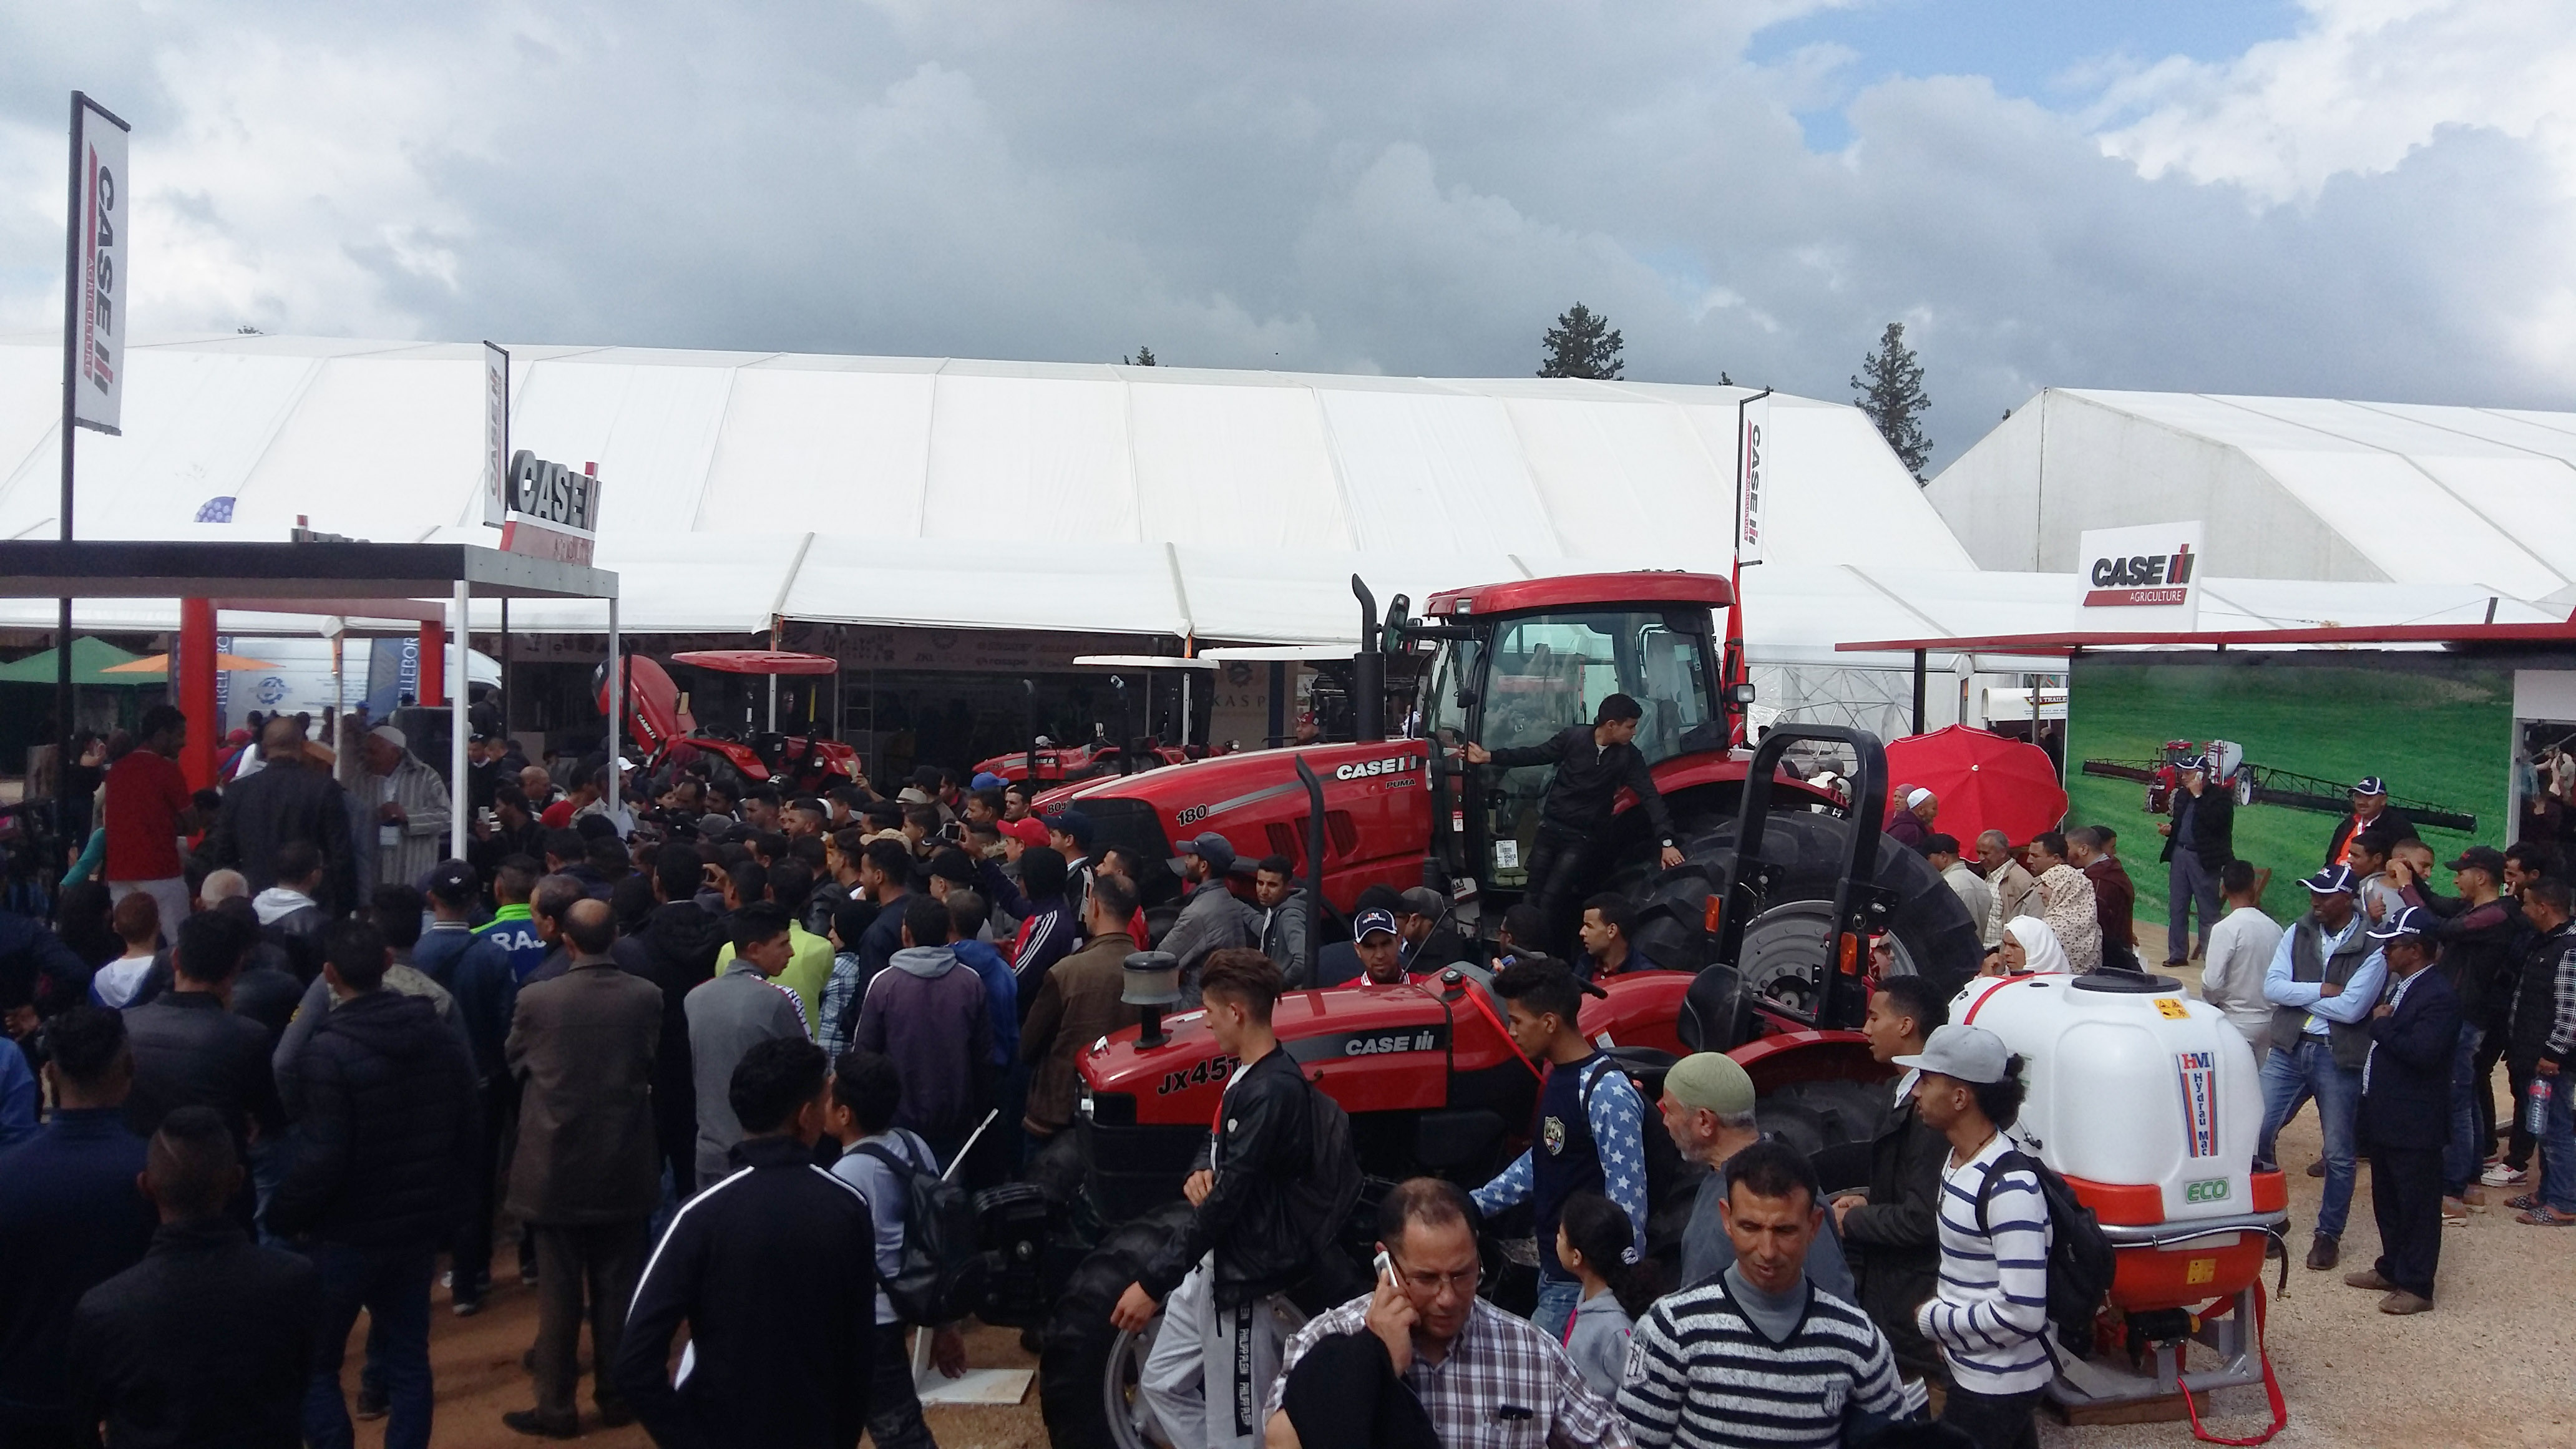 CASE IH EXHIBITED ITS TRACTOR AND BALER OFFERING AT SIAM 2018